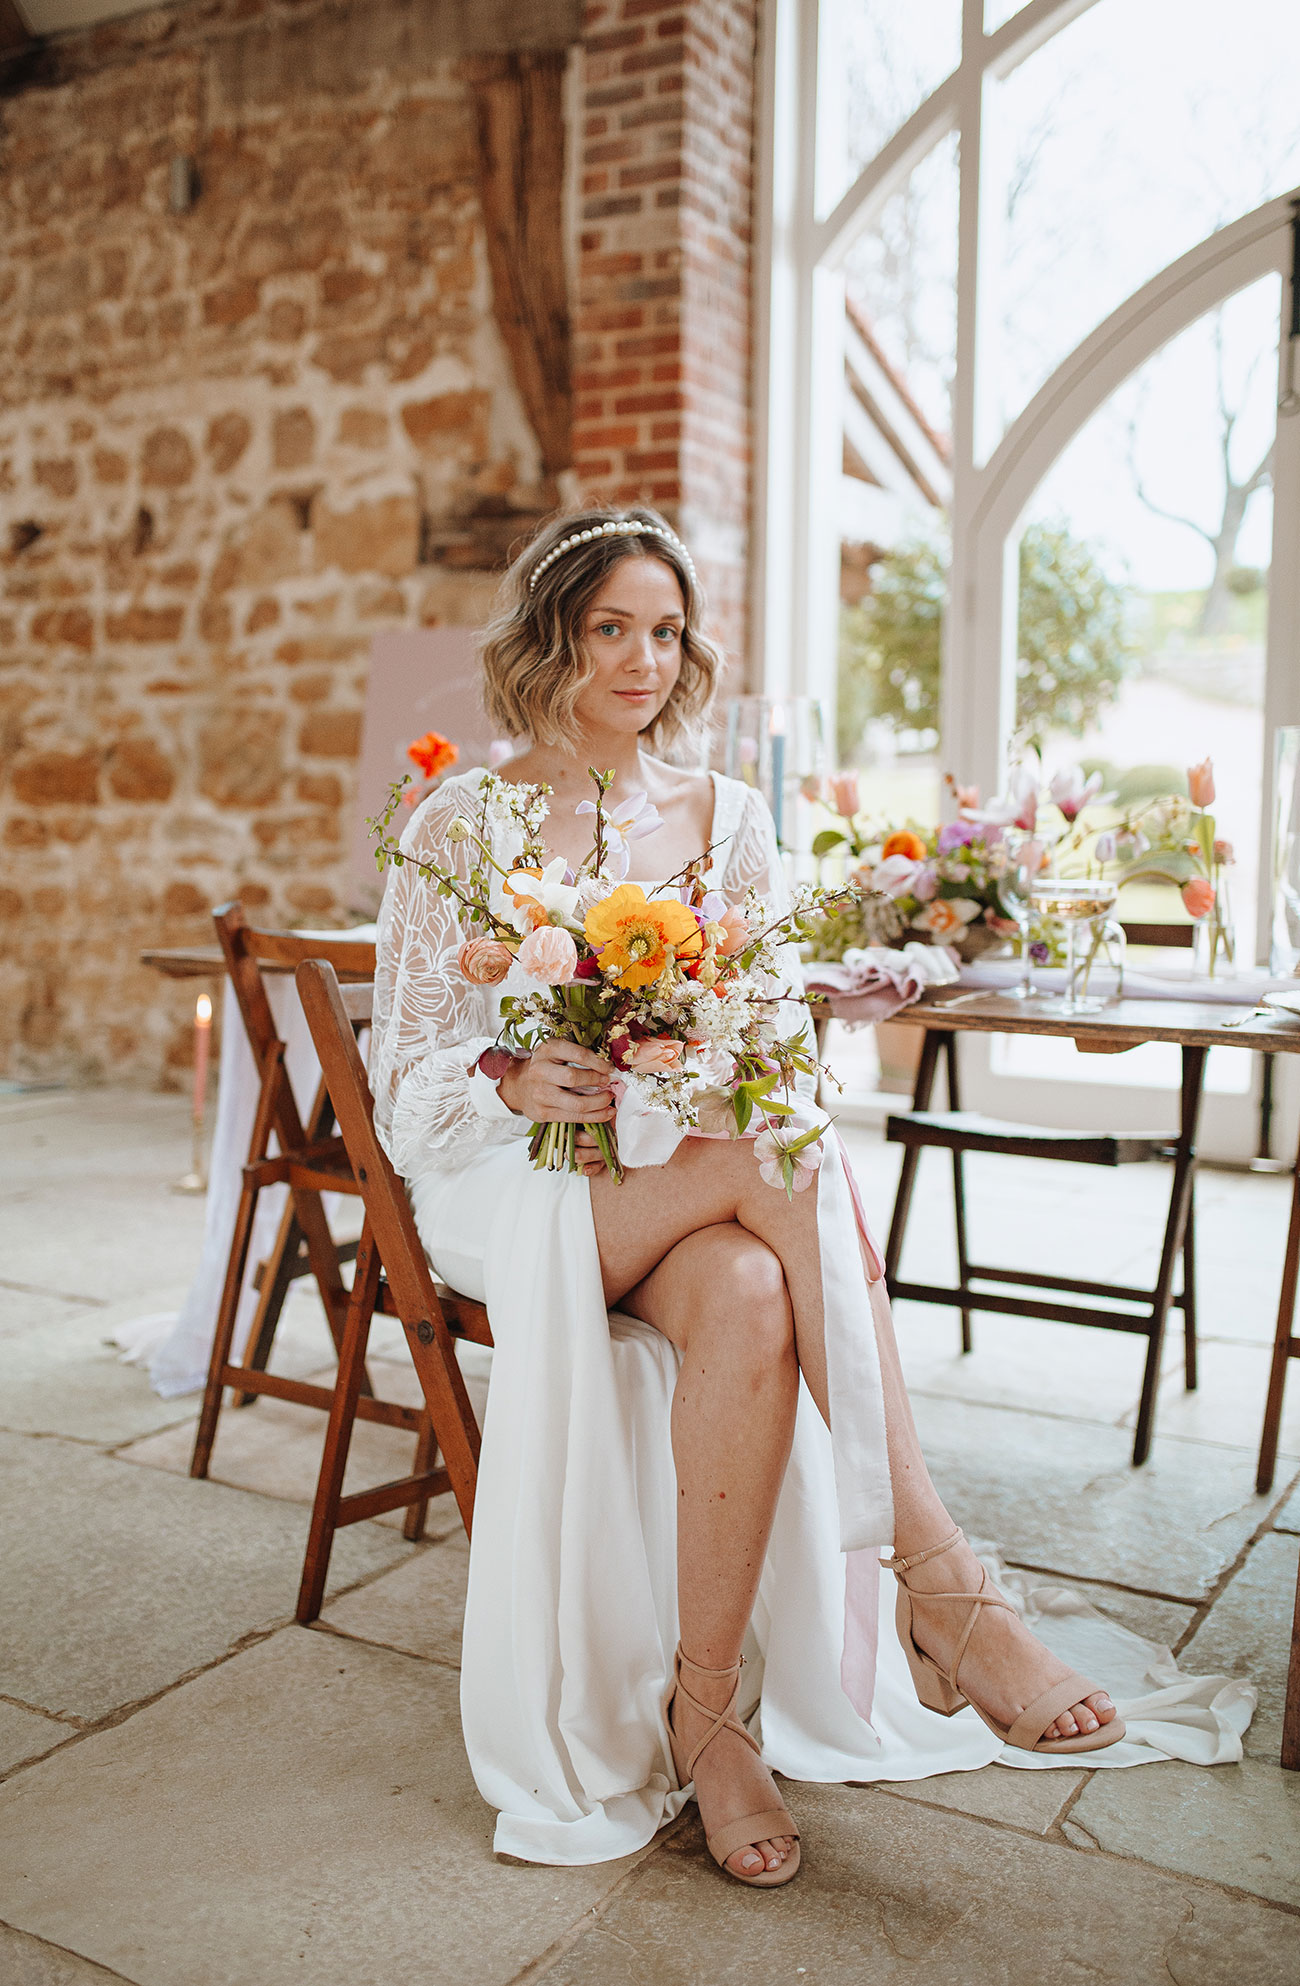 Wedding Styled Shoot Rustic Natural Florals Barn15